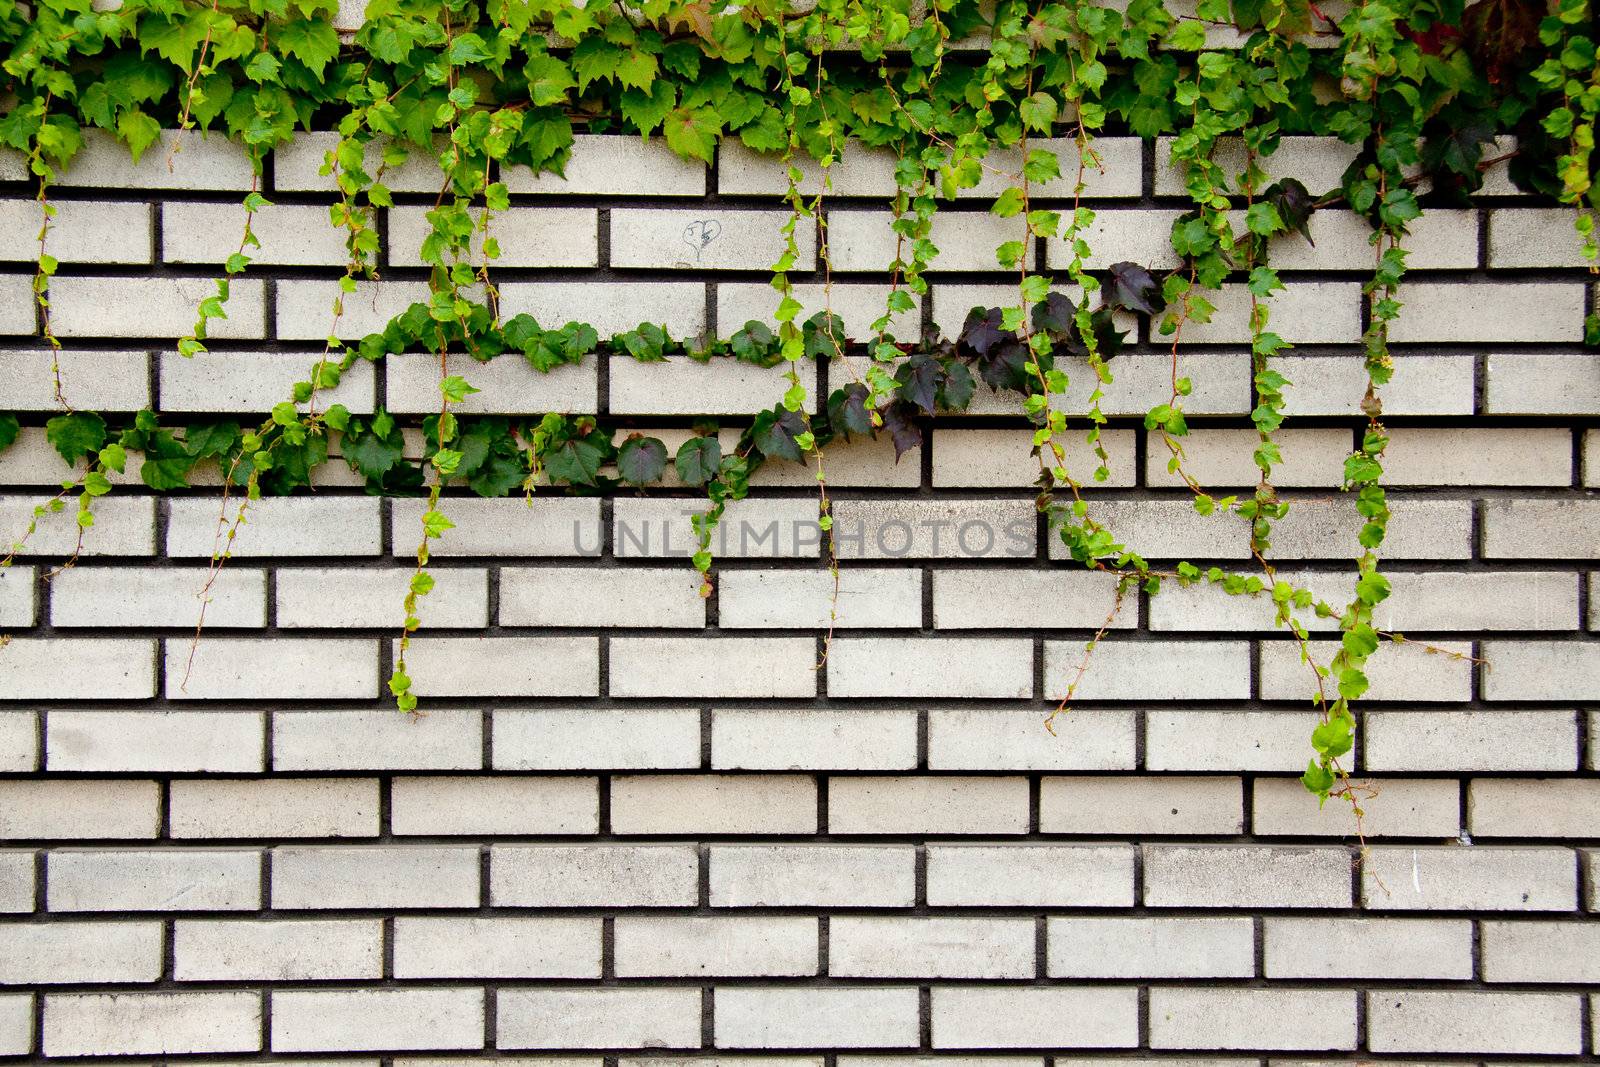 Ivy creeps down a brick wall to create a unique and interesting texture background image perfect for a layout or use with text.